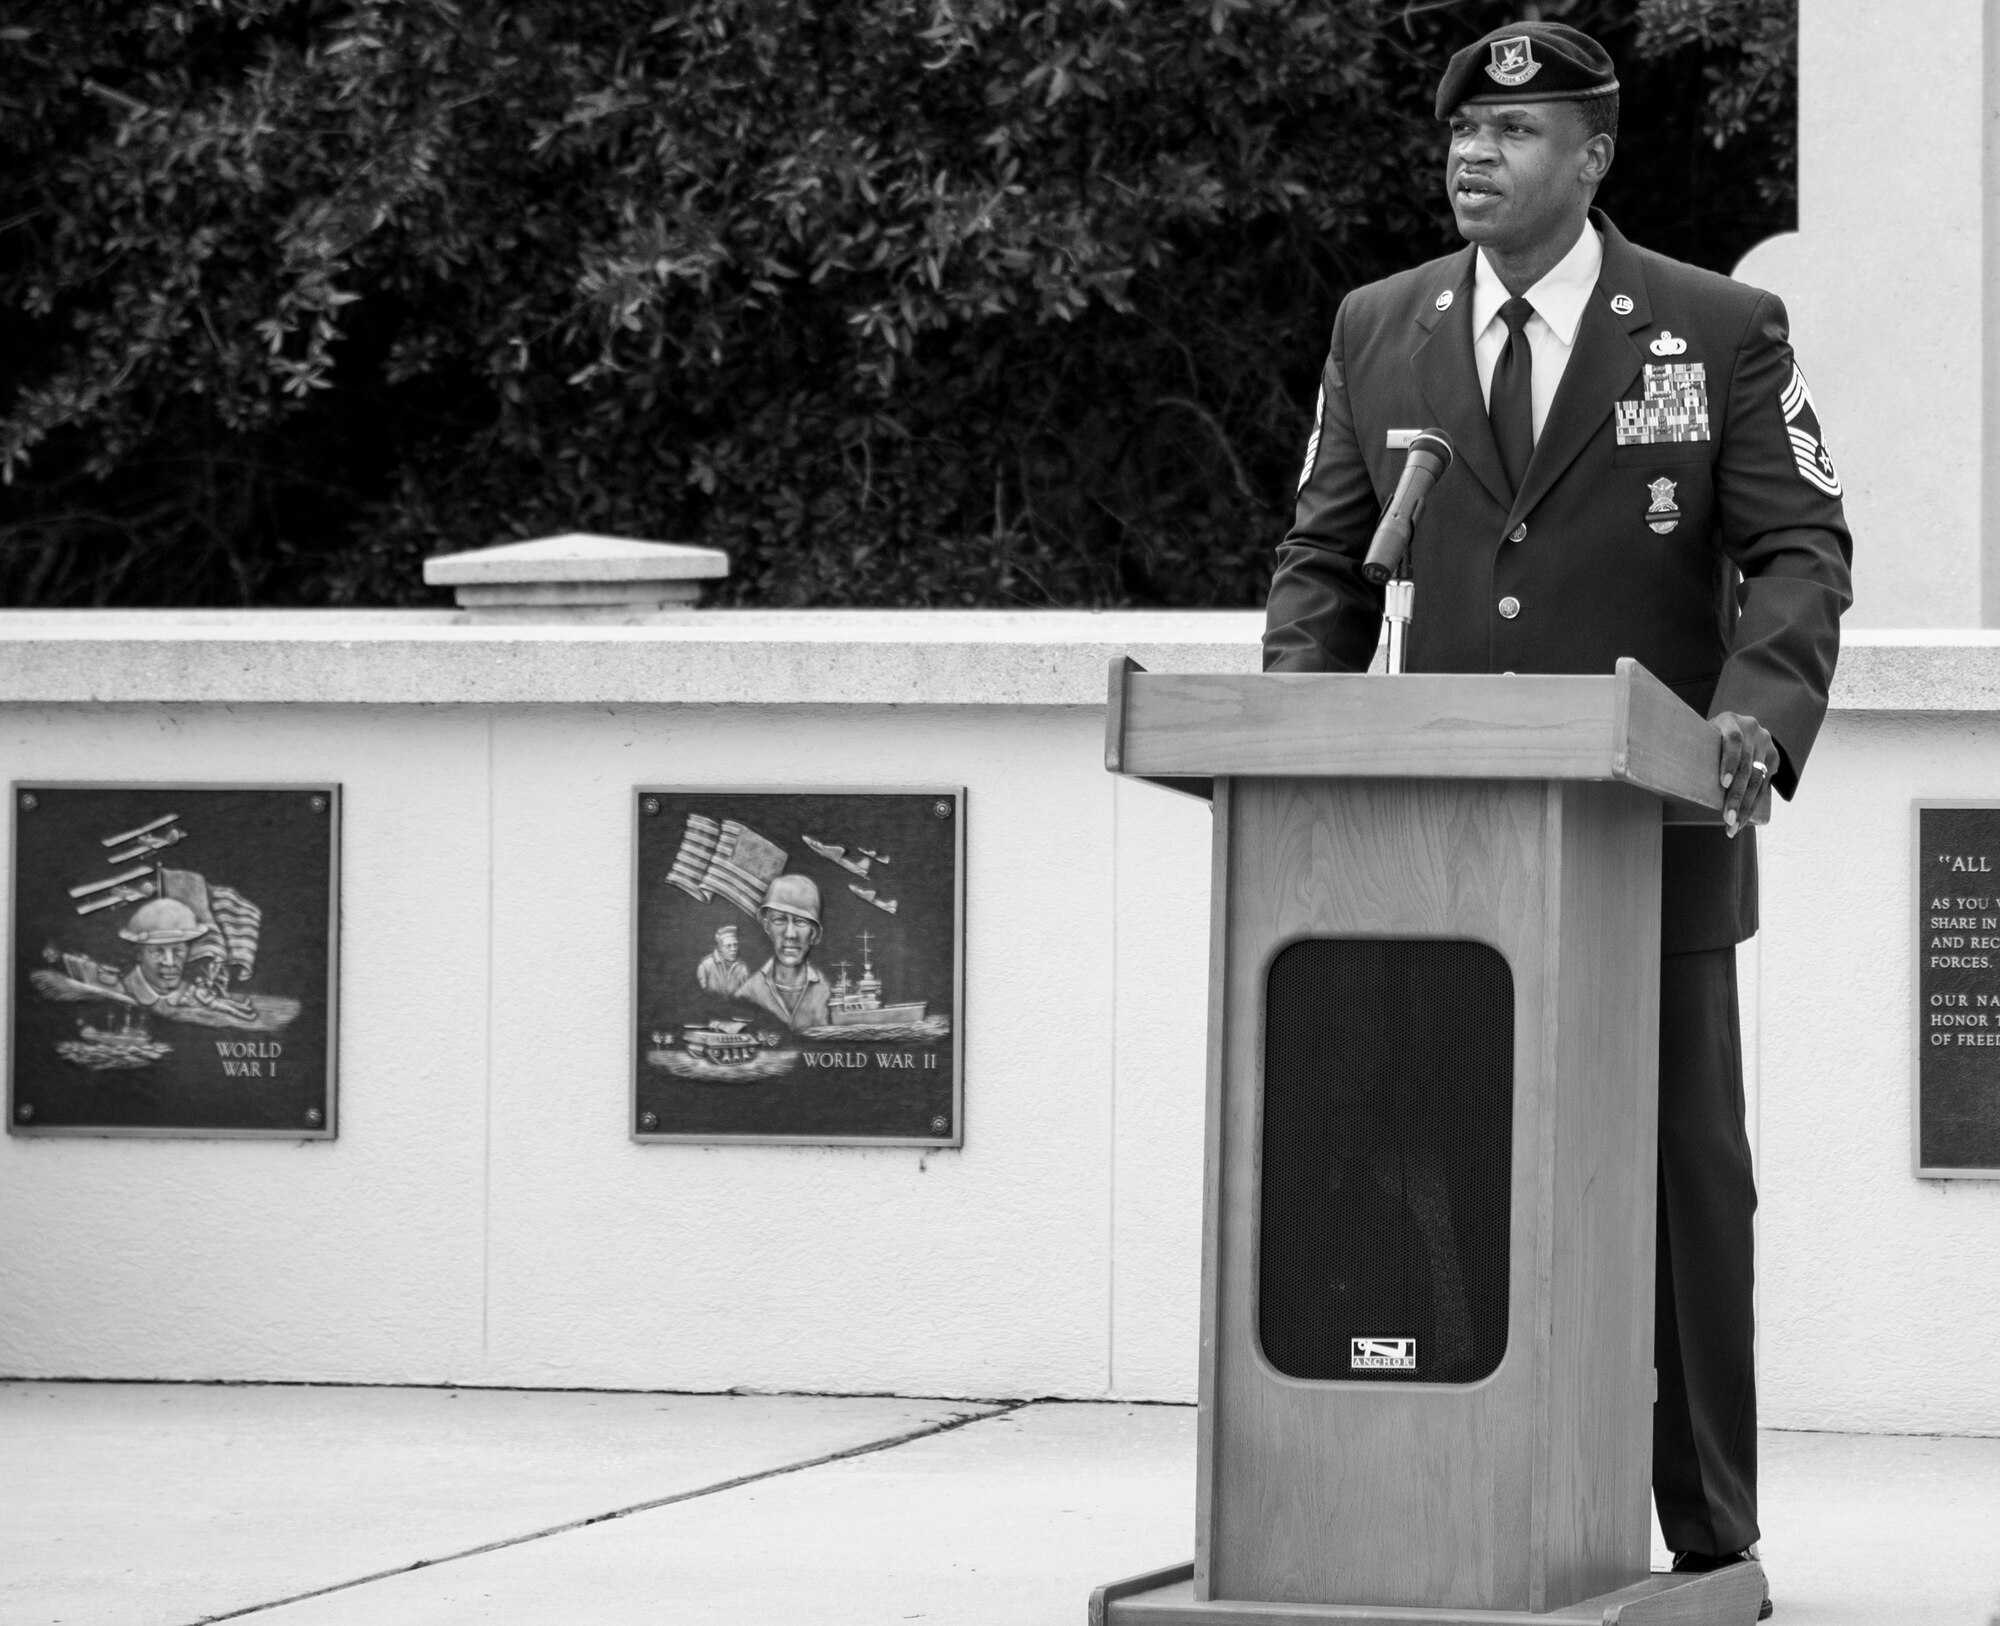 Chief Master Sgt. Mario White, 96th Security Forces Squadron, speaks to the Airmen attending the opening ceremony of Police Week at Eglin Air Force Base, Fla., May 15.  The ceremony was a gathering of security forces personnel for a formation and reveille ceremony performed at the All Wars Memorial.  Police Week activities will happen throughout the week and will close with security forces Airmen performing a retreat ceremony at Bldg. 1.  (U.S. Air Force photo/Samuel King Jr.)